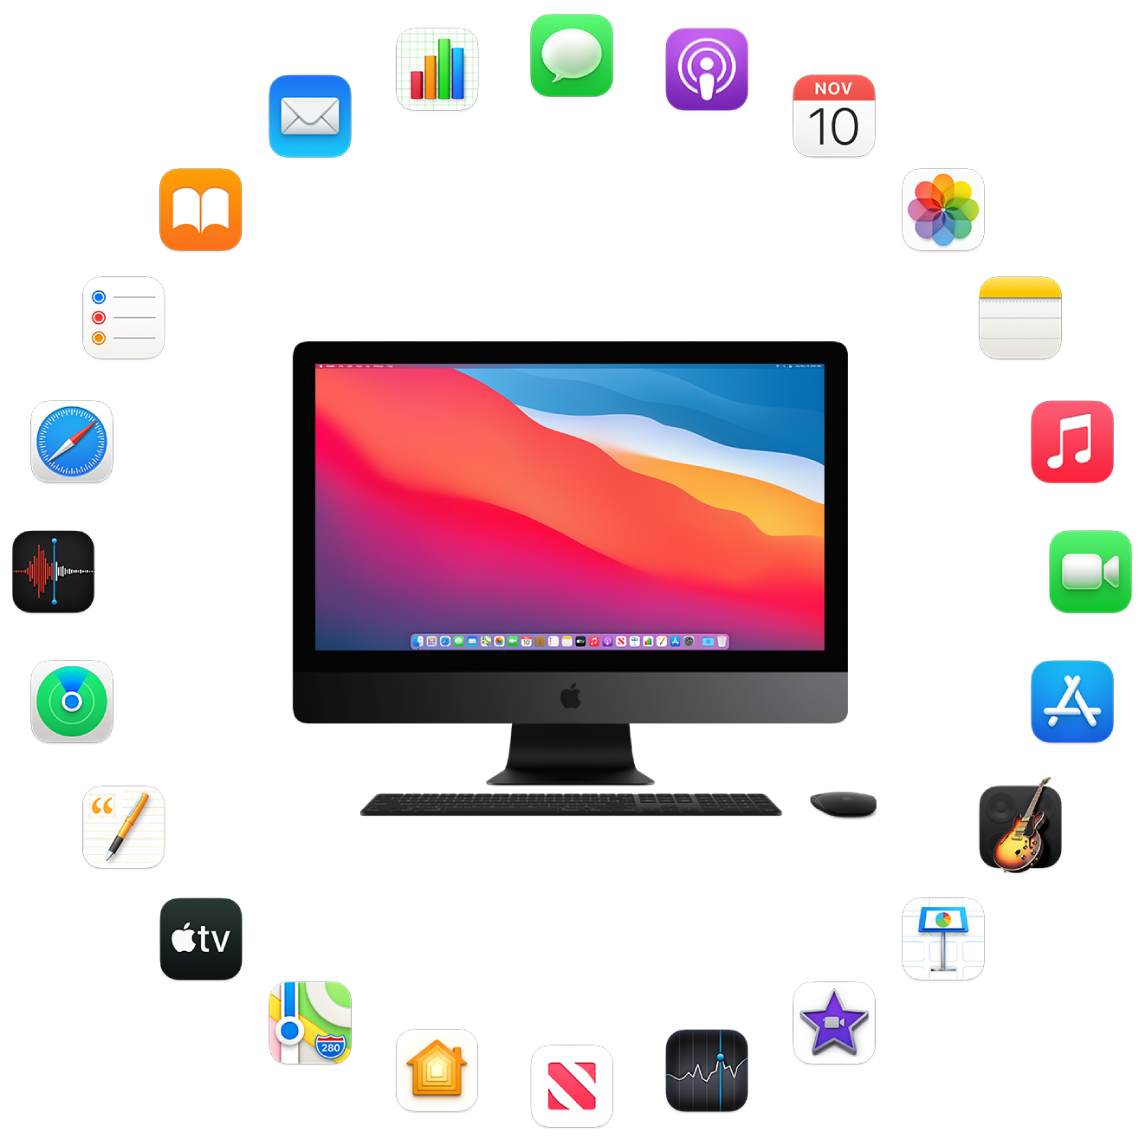 An iMac Pro surrounded by the icons for the built-in apps described in the following sections.